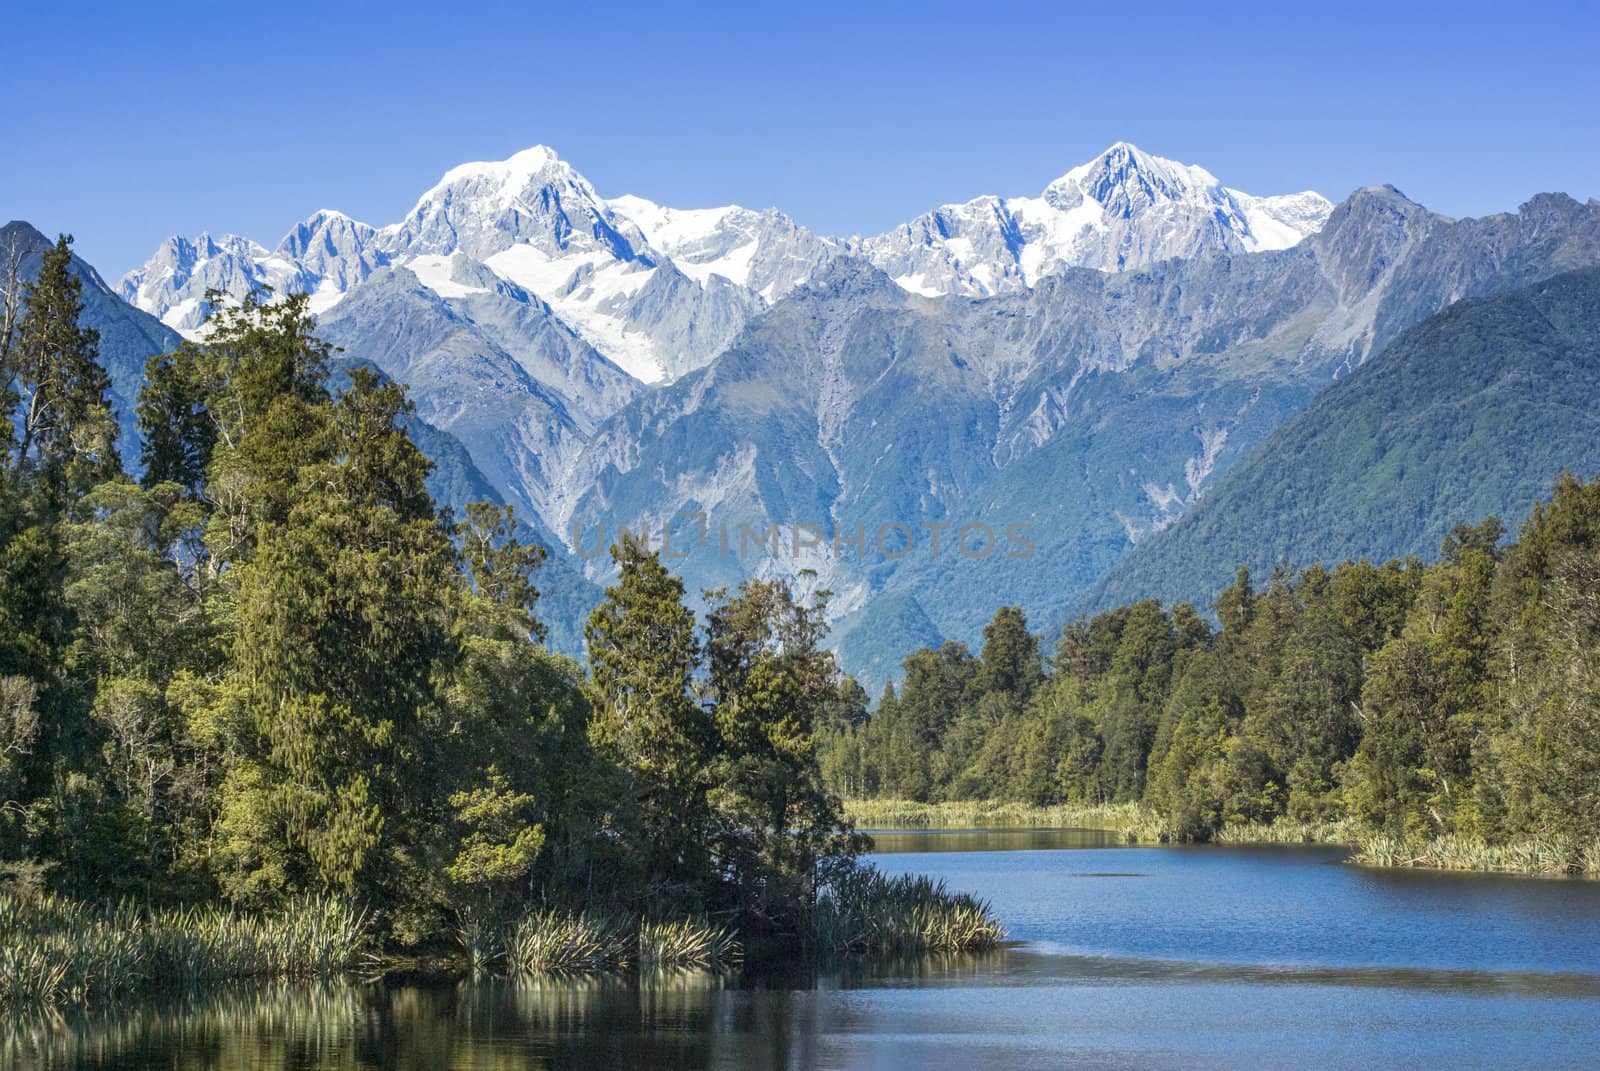 Lake Matheson with snow covered Mount Tasman and Mount Cook, New Zealand's highest mountain. Mount Cook is on the right.